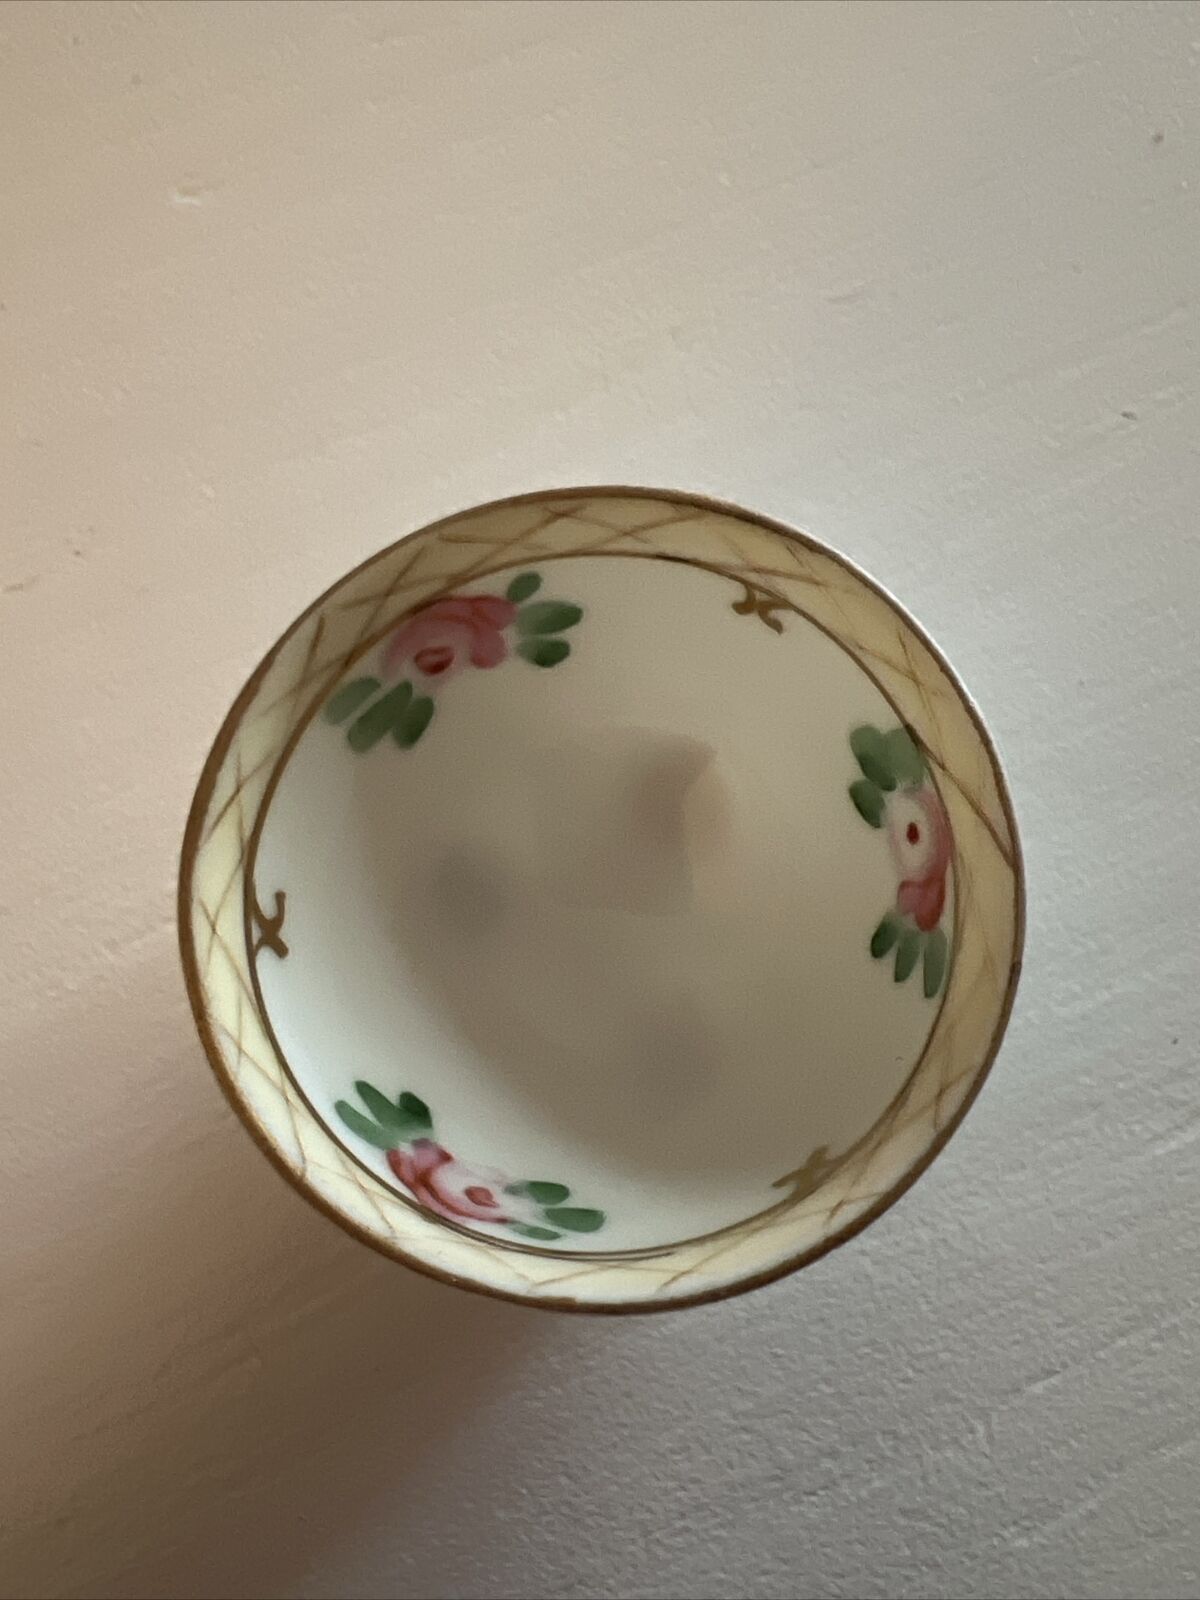 Antique / Vintage Hand Painted Nippon Footed Sauce / Condiment Bowl